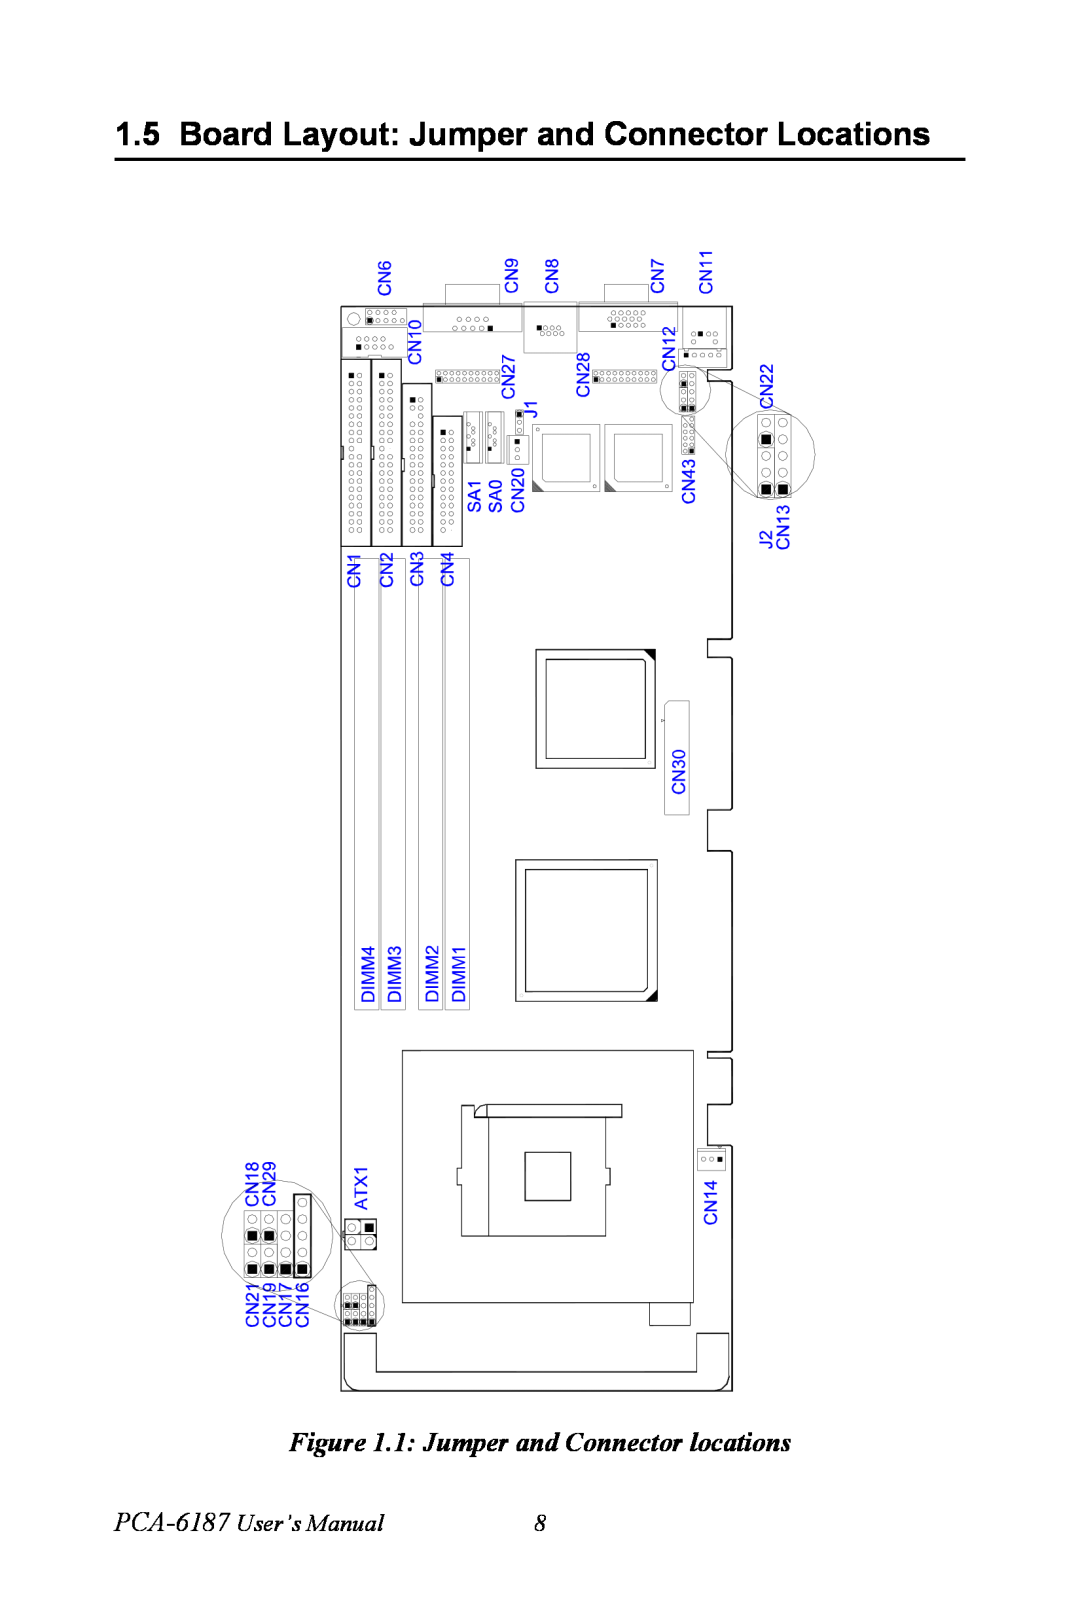 Advantech Board Layout Jumper and Connector Locations, 1 Jumper and Connector locations, PCA-6187 User’s Manual 